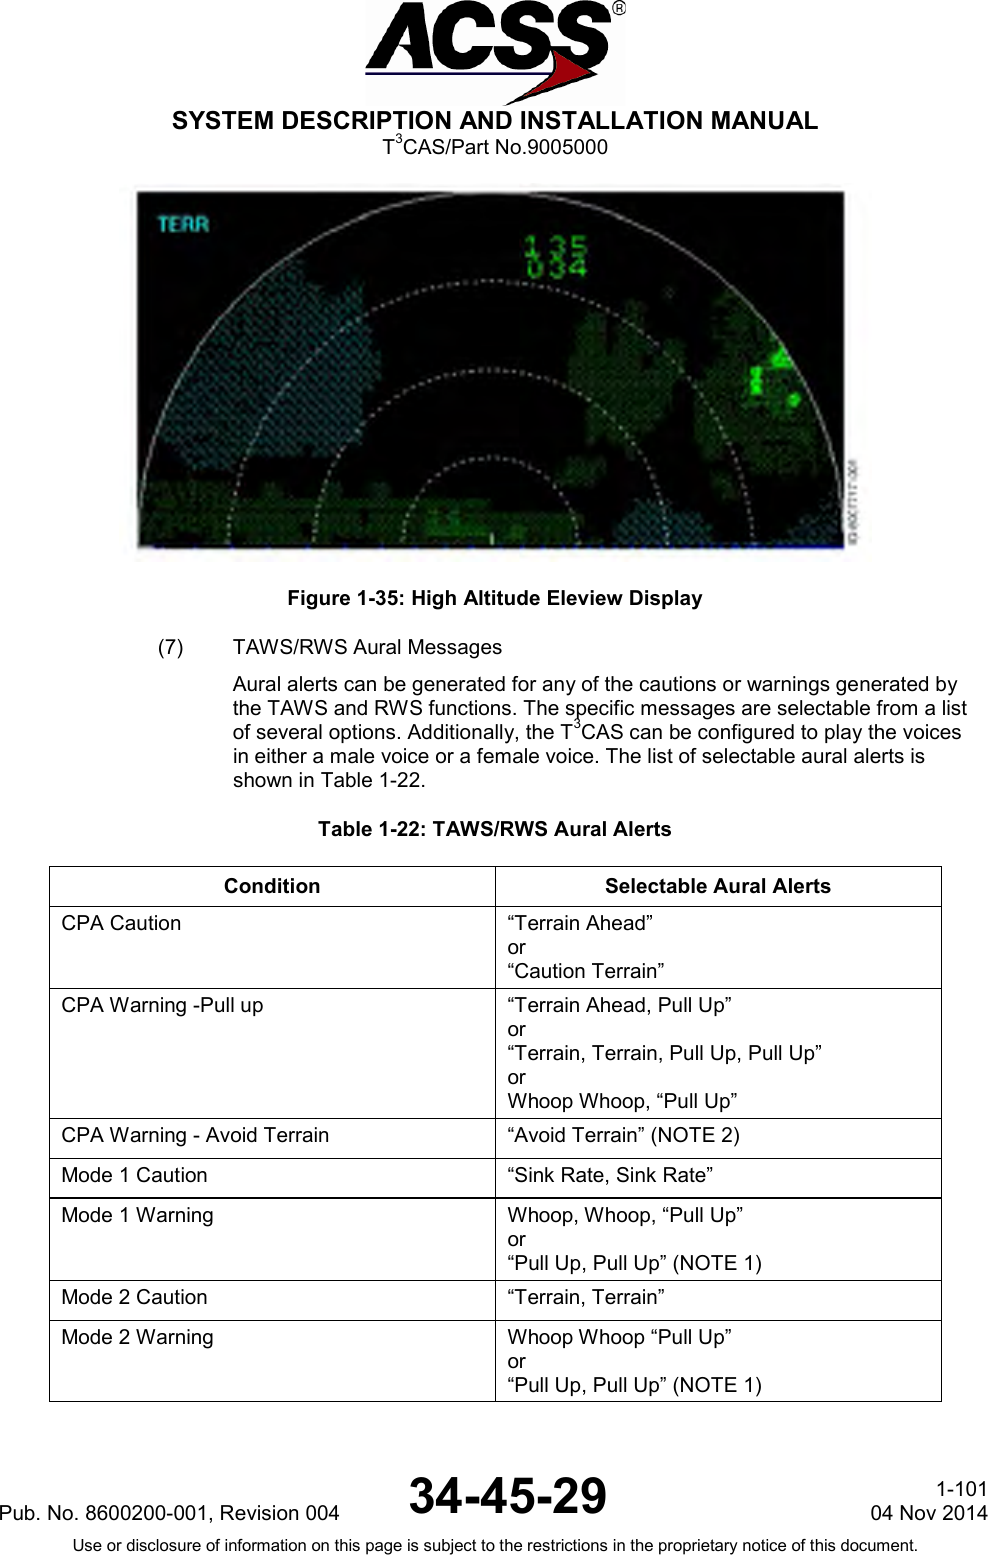  SYSTEM DESCRIPTION AND INSTALLATION MANUAL T3CAS/Part No.9005000  Figure 1-35: High Altitude Eleview Display (7) TAWS/RWS Aural Messages Aural alerts can be generated for any of the cautions or warnings generated by the TAWS and RWS functions. The specific messages are selectable from a list of several options. Additionally, the T3CAS can be configured to play the voices in either a male voice or a female voice. The list of selectable aural alerts is shown in Table 1-22. Table 1-22: TAWS/RWS Aural Alerts Condition Selectable Aural Alerts CPA Caution “Terrain Ahead” or “Caution Terrain” CPA Warning -Pull up “Terrain Ahead, Pull Up” or “Terrain, Terrain, Pull Up, Pull Up” or Whoop Whoop, “Pull Up” CPA Warning - Avoid Terrain “Avoid Terrain” (NOTE 2) Mode 1 Caution “Sink Rate, Sink Rate” Mode 1 Warning Whoop, Whoop, “Pull Up” or “Pull Up, Pull Up” (NOTE 1) Mode 2 Caution “Terrain, Terrain” Mode 2 Warning Whoop Whoop “Pull Up” or “Pull Up, Pull Up” (NOTE 1)  Pub. No. 8600200-001, Revision 004 34-45-29 1-101 04 Nov 2014 Use or disclosure of information on this page is subject to the restrictions in the proprietary notice of this document.  